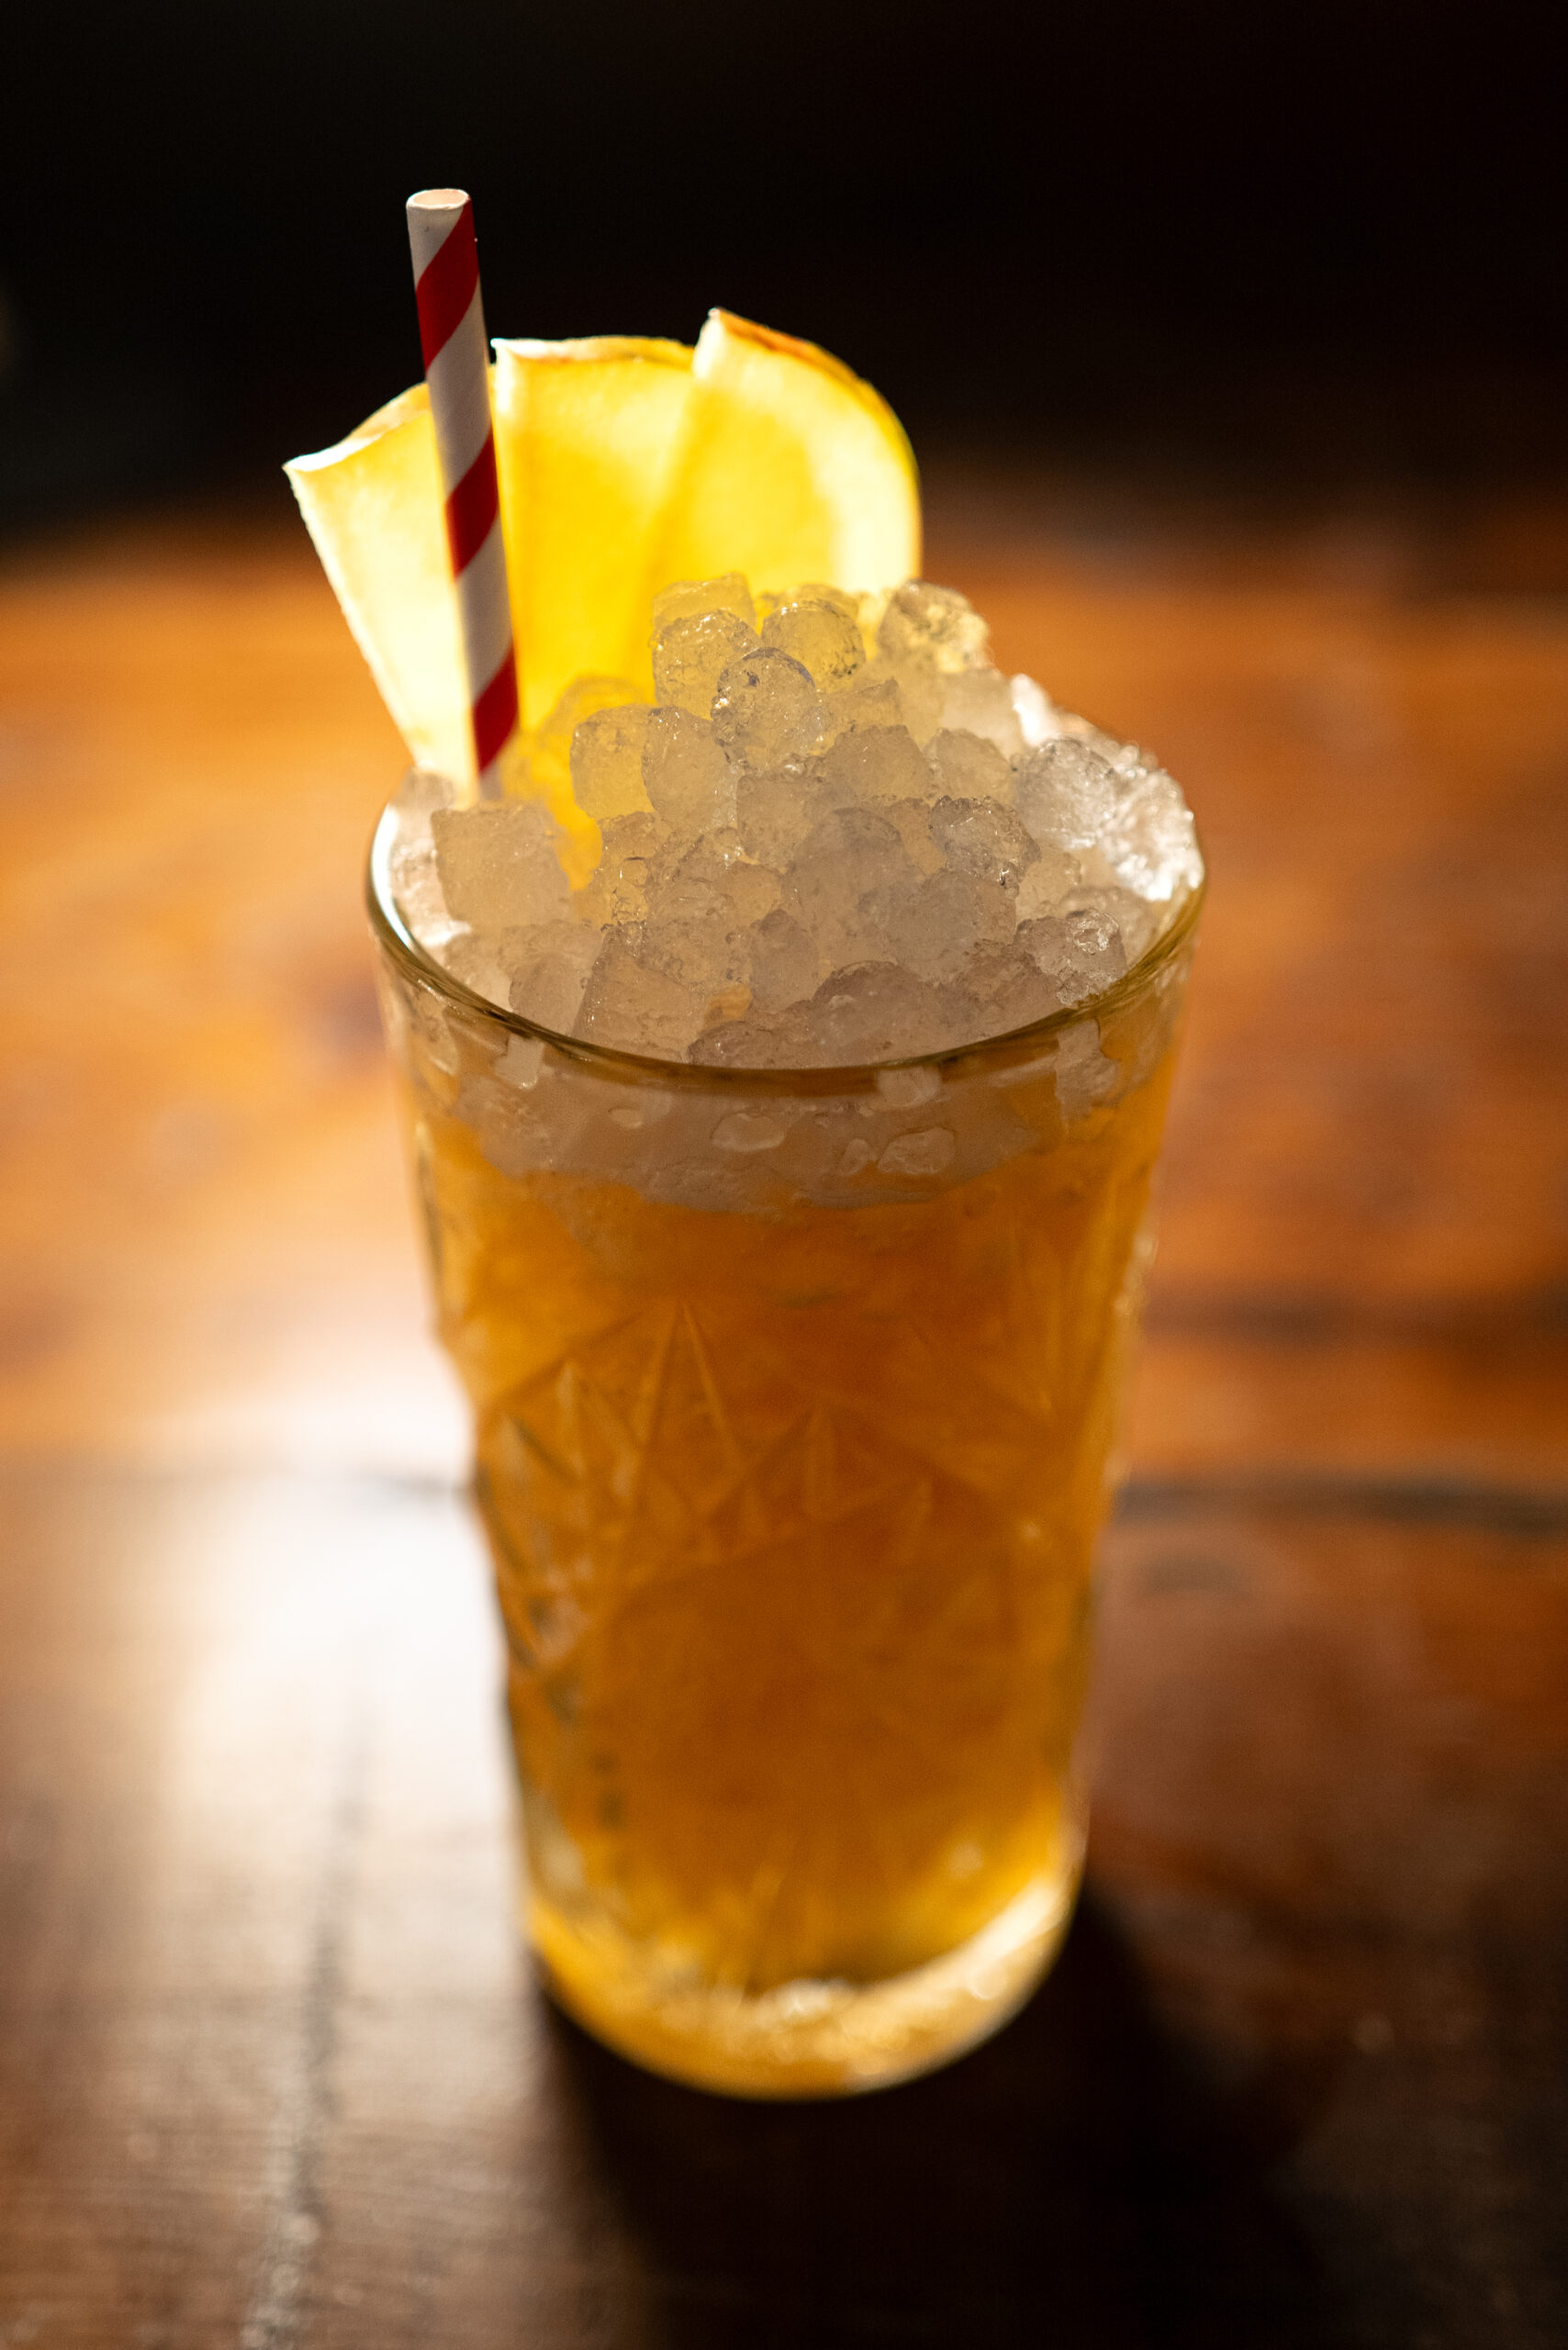 A scotch whisky and apple cider cocktail in a tall glass with crushed ice and a garnish of apple slices.